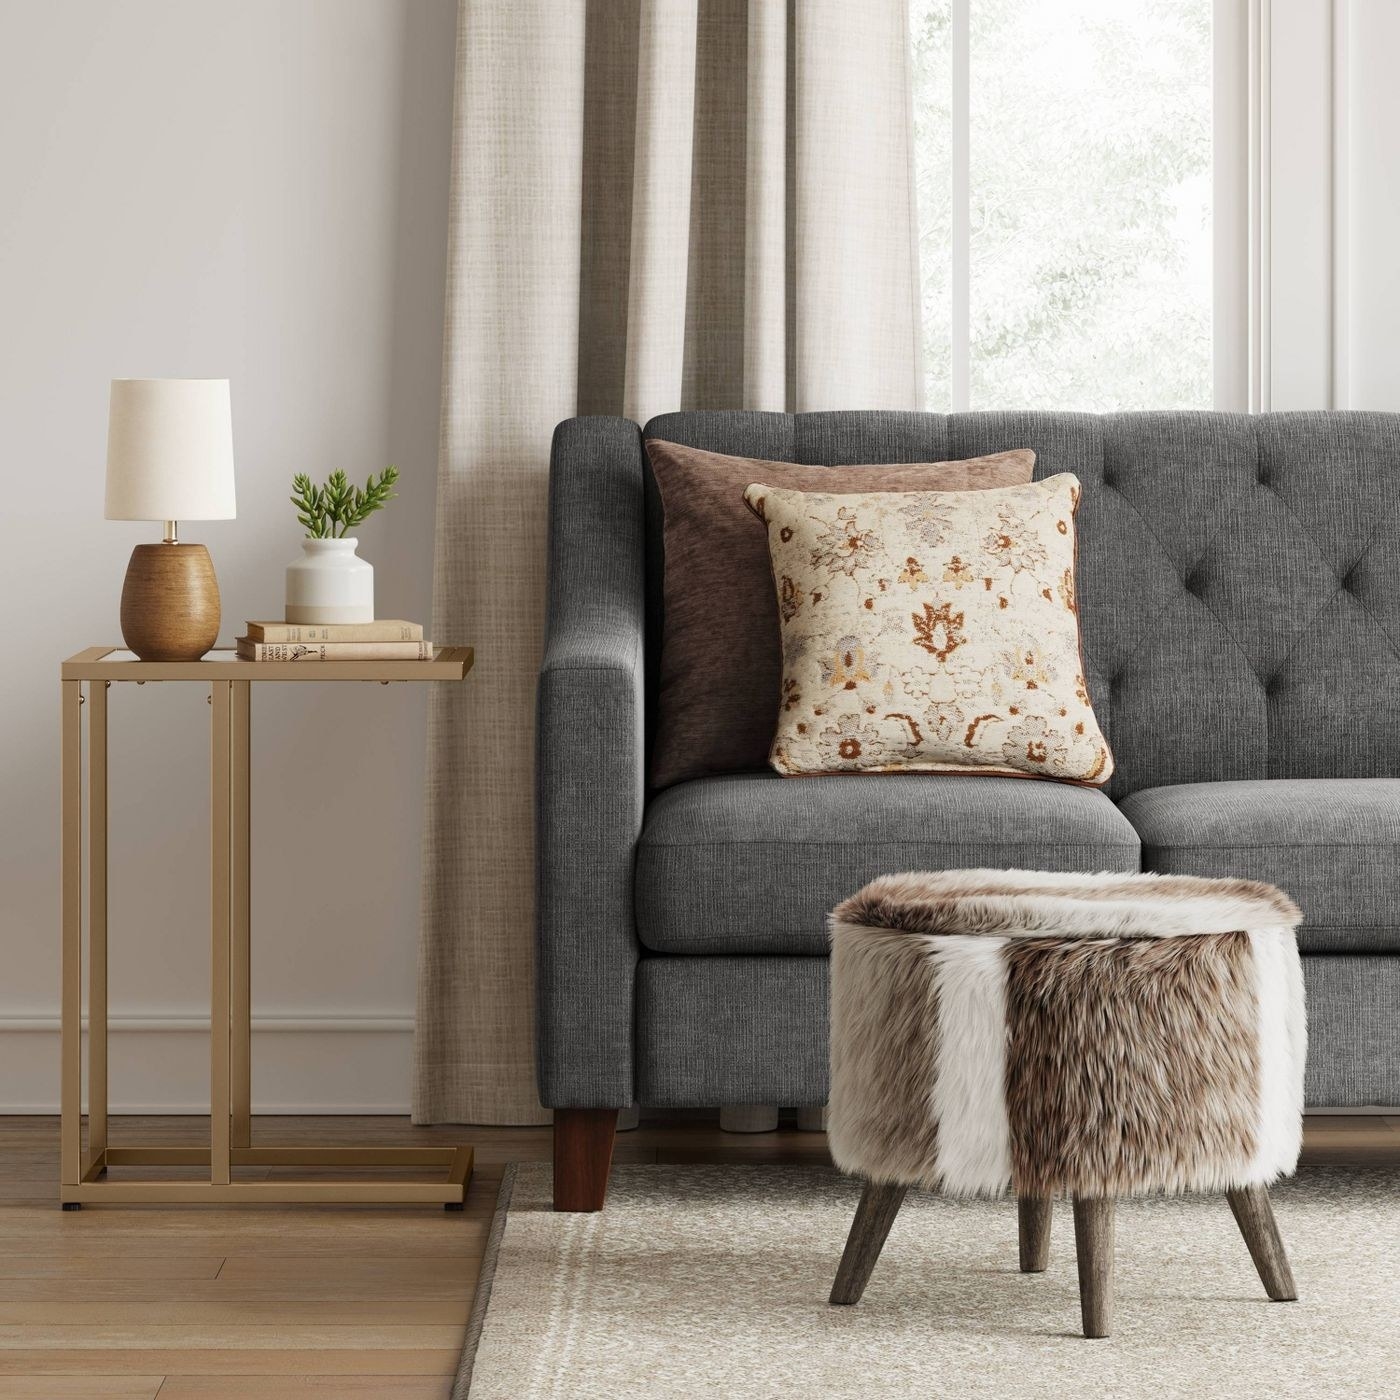 A brown and white faux fur ottoman in room with grey couch